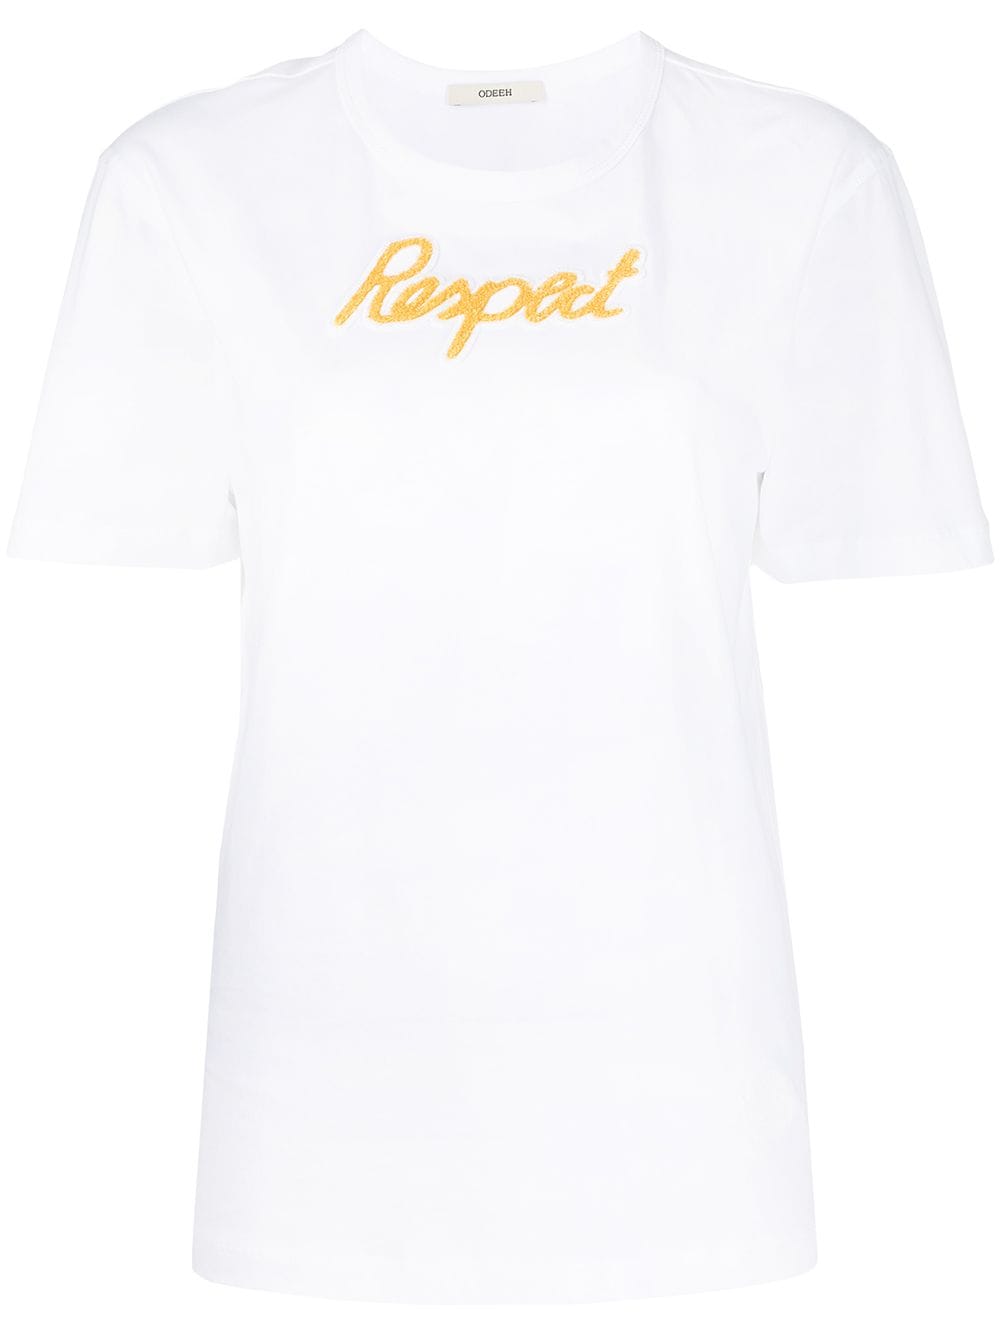 Odeeh Respect Patch T-shirt In White